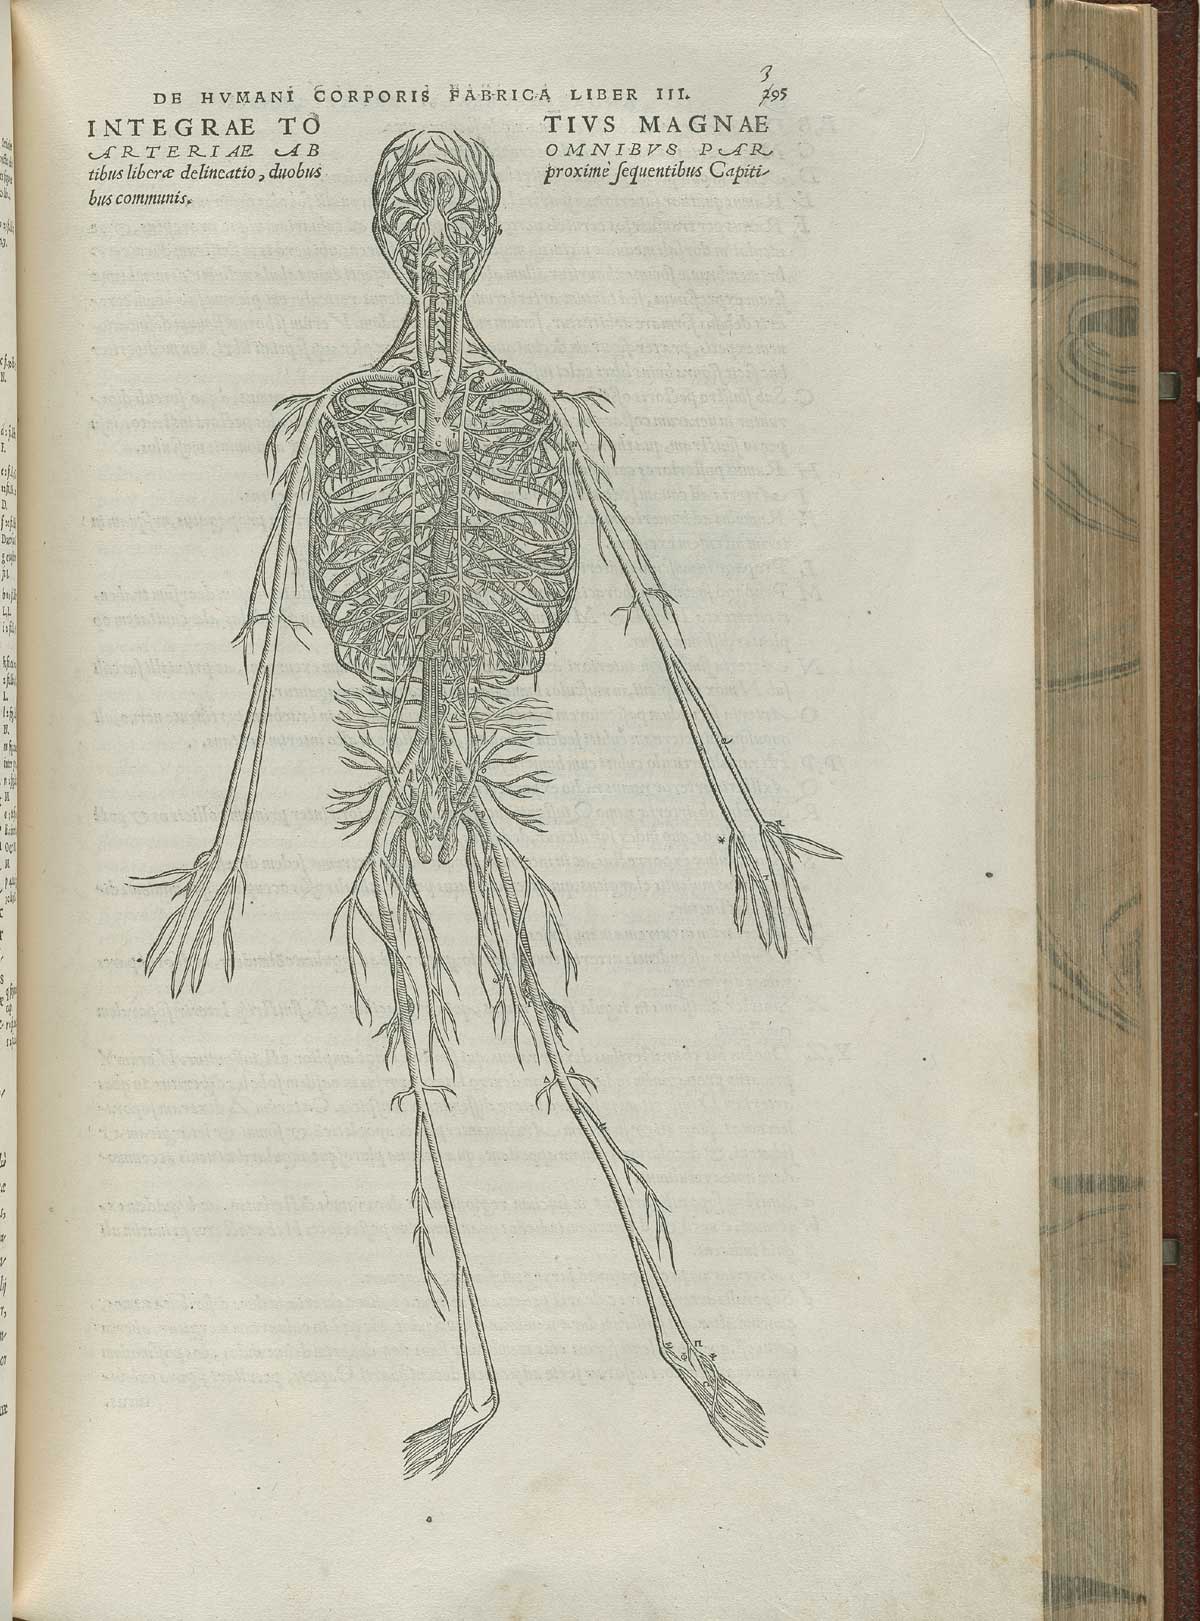 Page 395 of Andreas Vesalius' De corporis humani fabrica libri septem, featuring the illustrated woodcut of a full-length view of the arterial system.